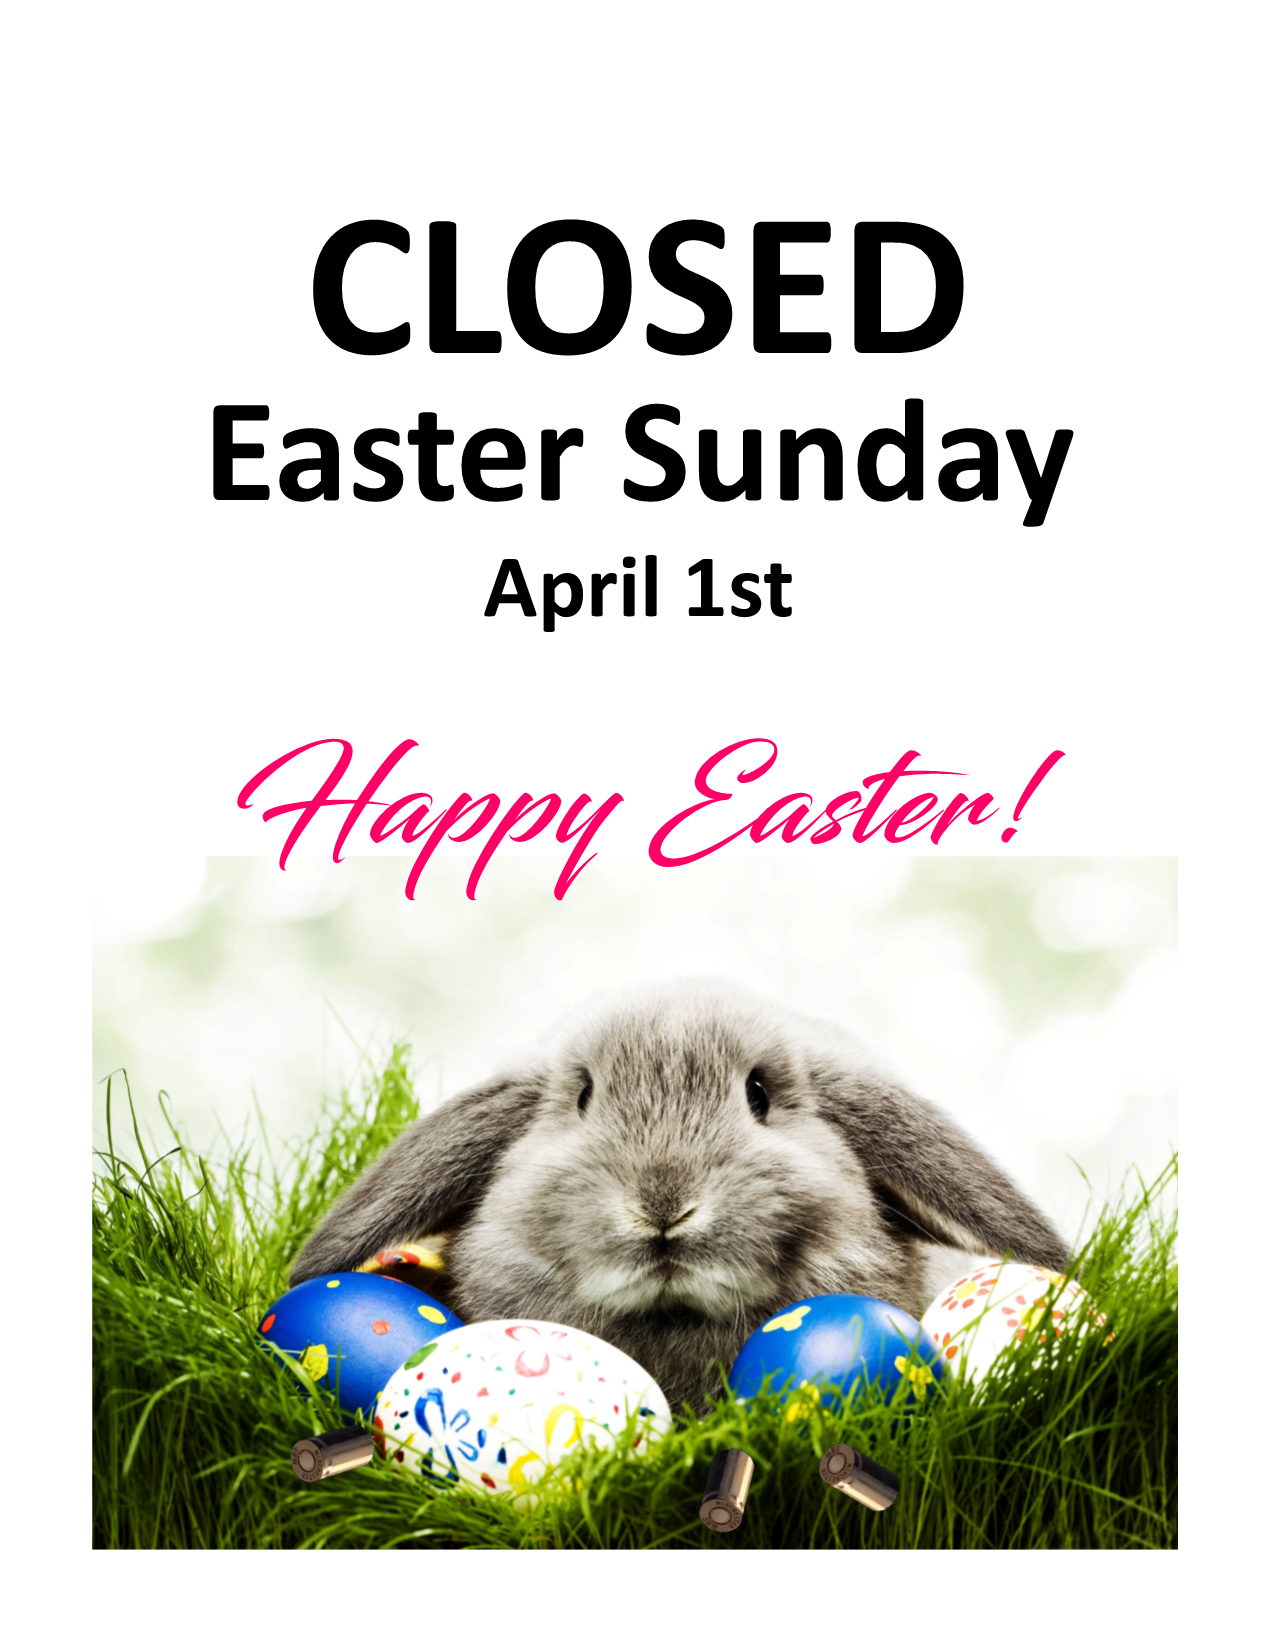 Closed Easter Sign 2018 The Range of Richfield